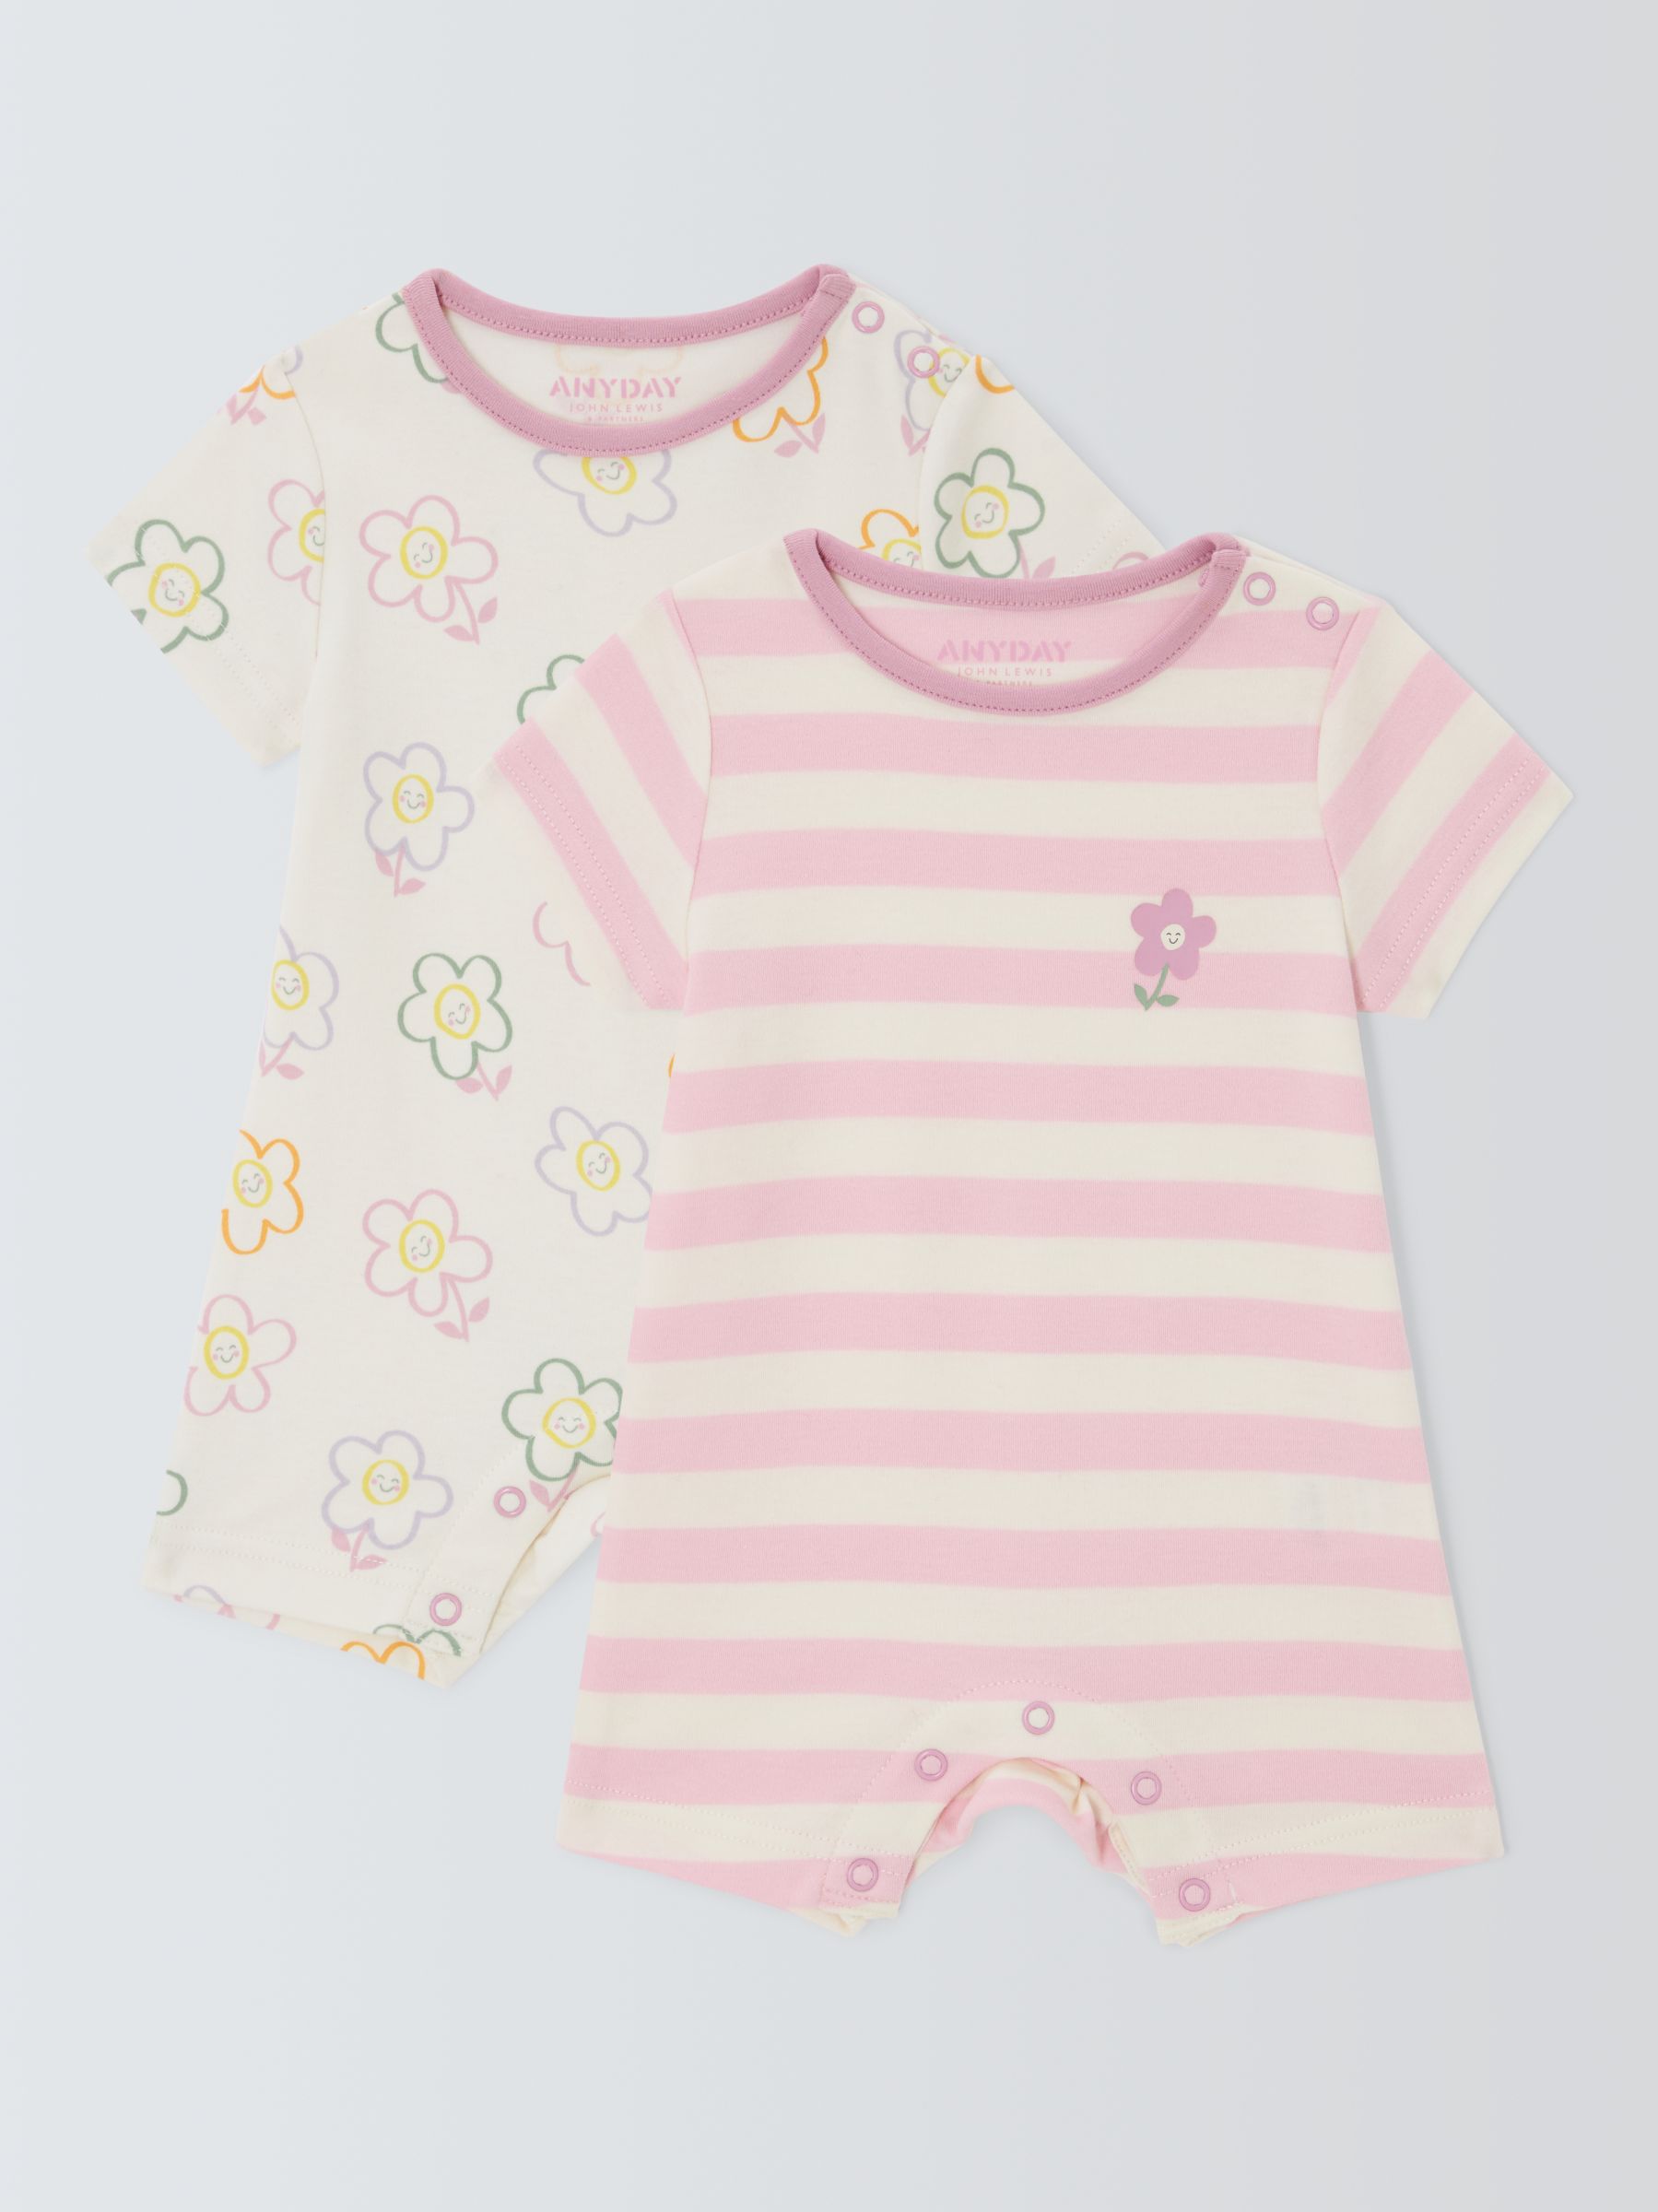 John Lewis ANYDAY Baby Floral Romper, Pack of 2, Pink, 3-6 months